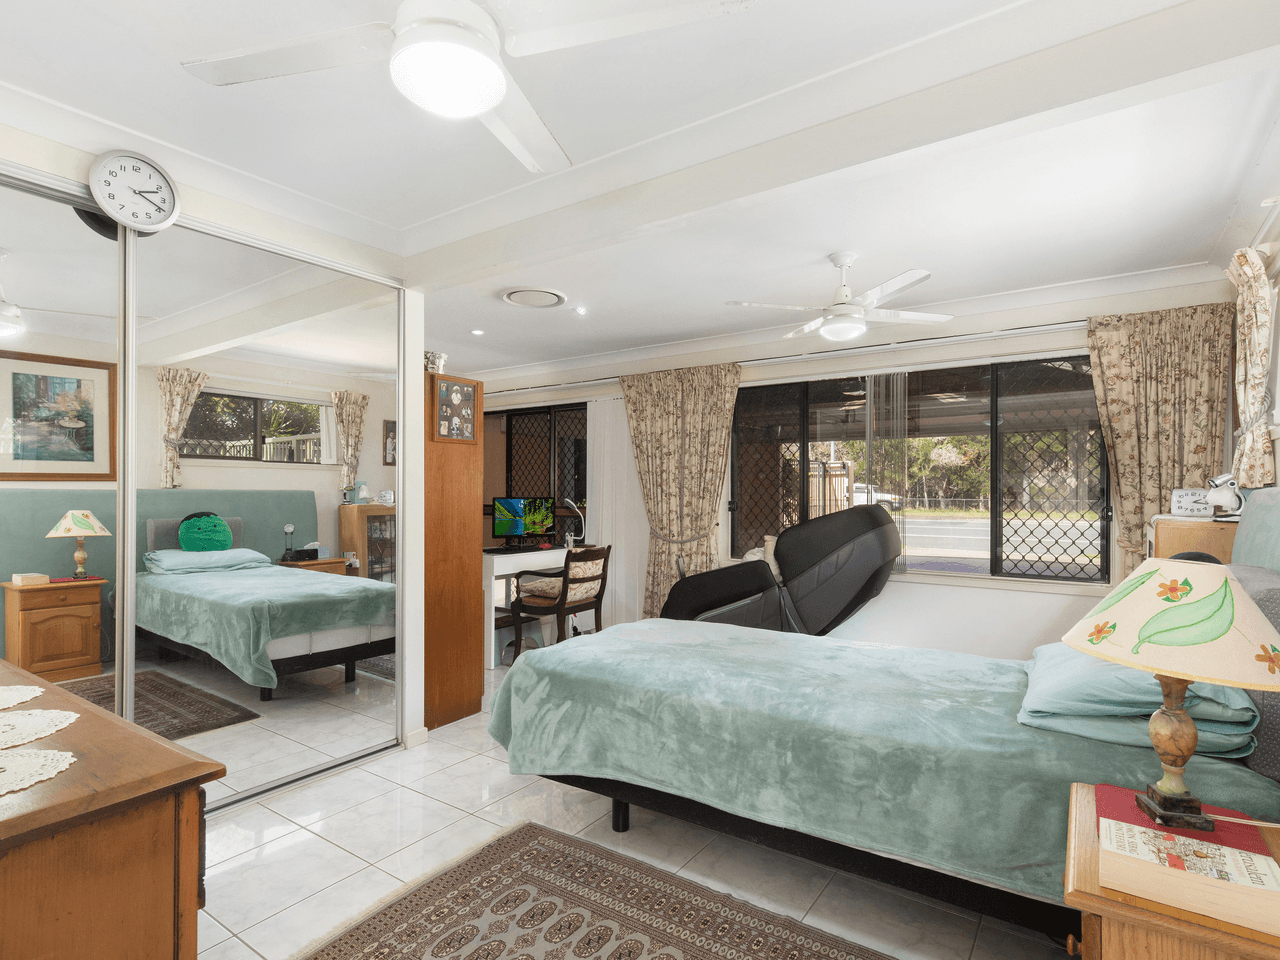 238 Oxley Drive, COOMBABAH, QLD 4216